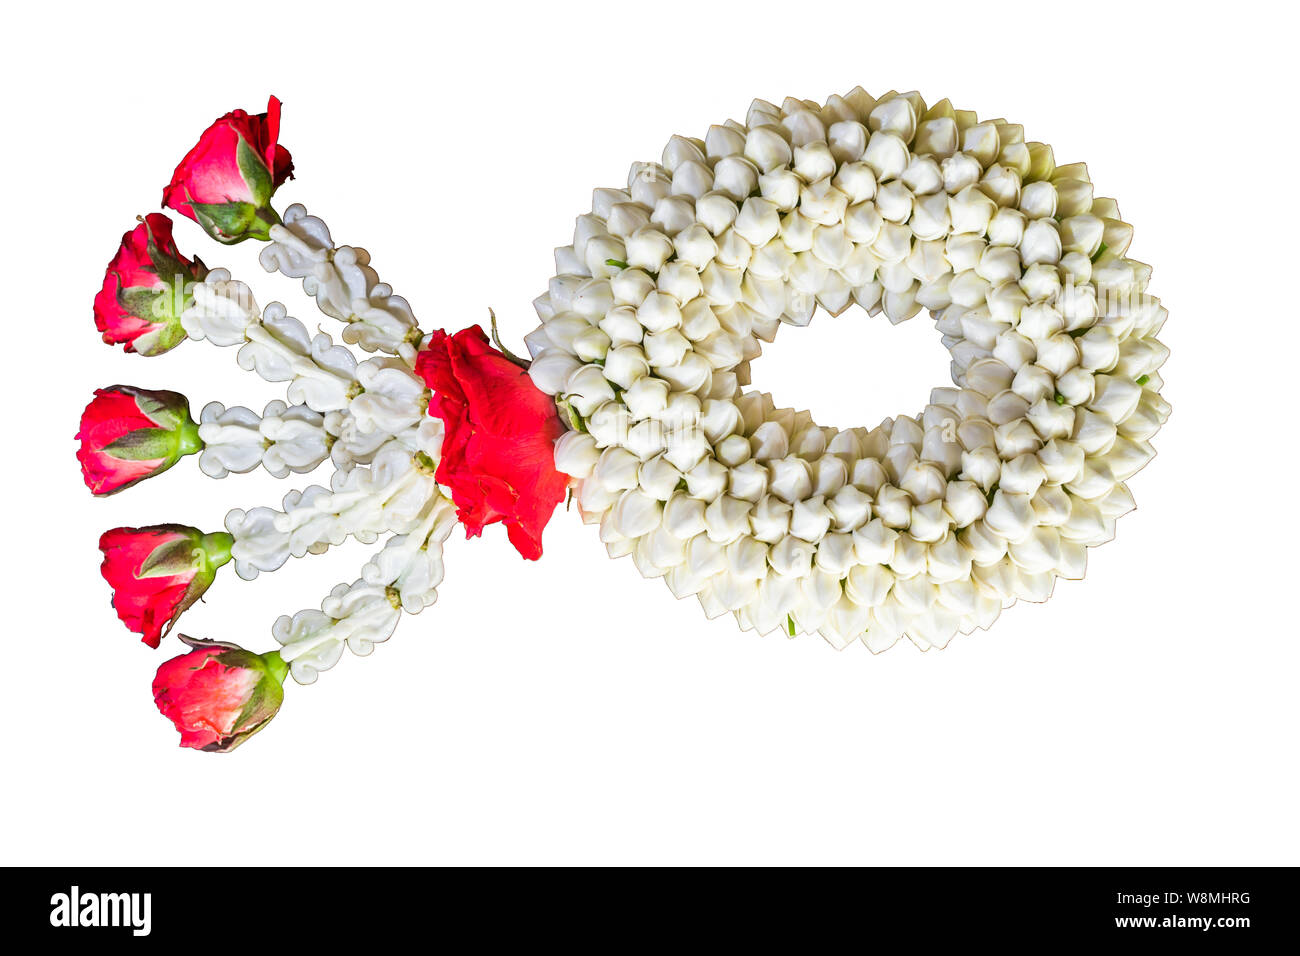 Thai traditional jasmine garland.symbol of Mother's day in thailand Stock Photo